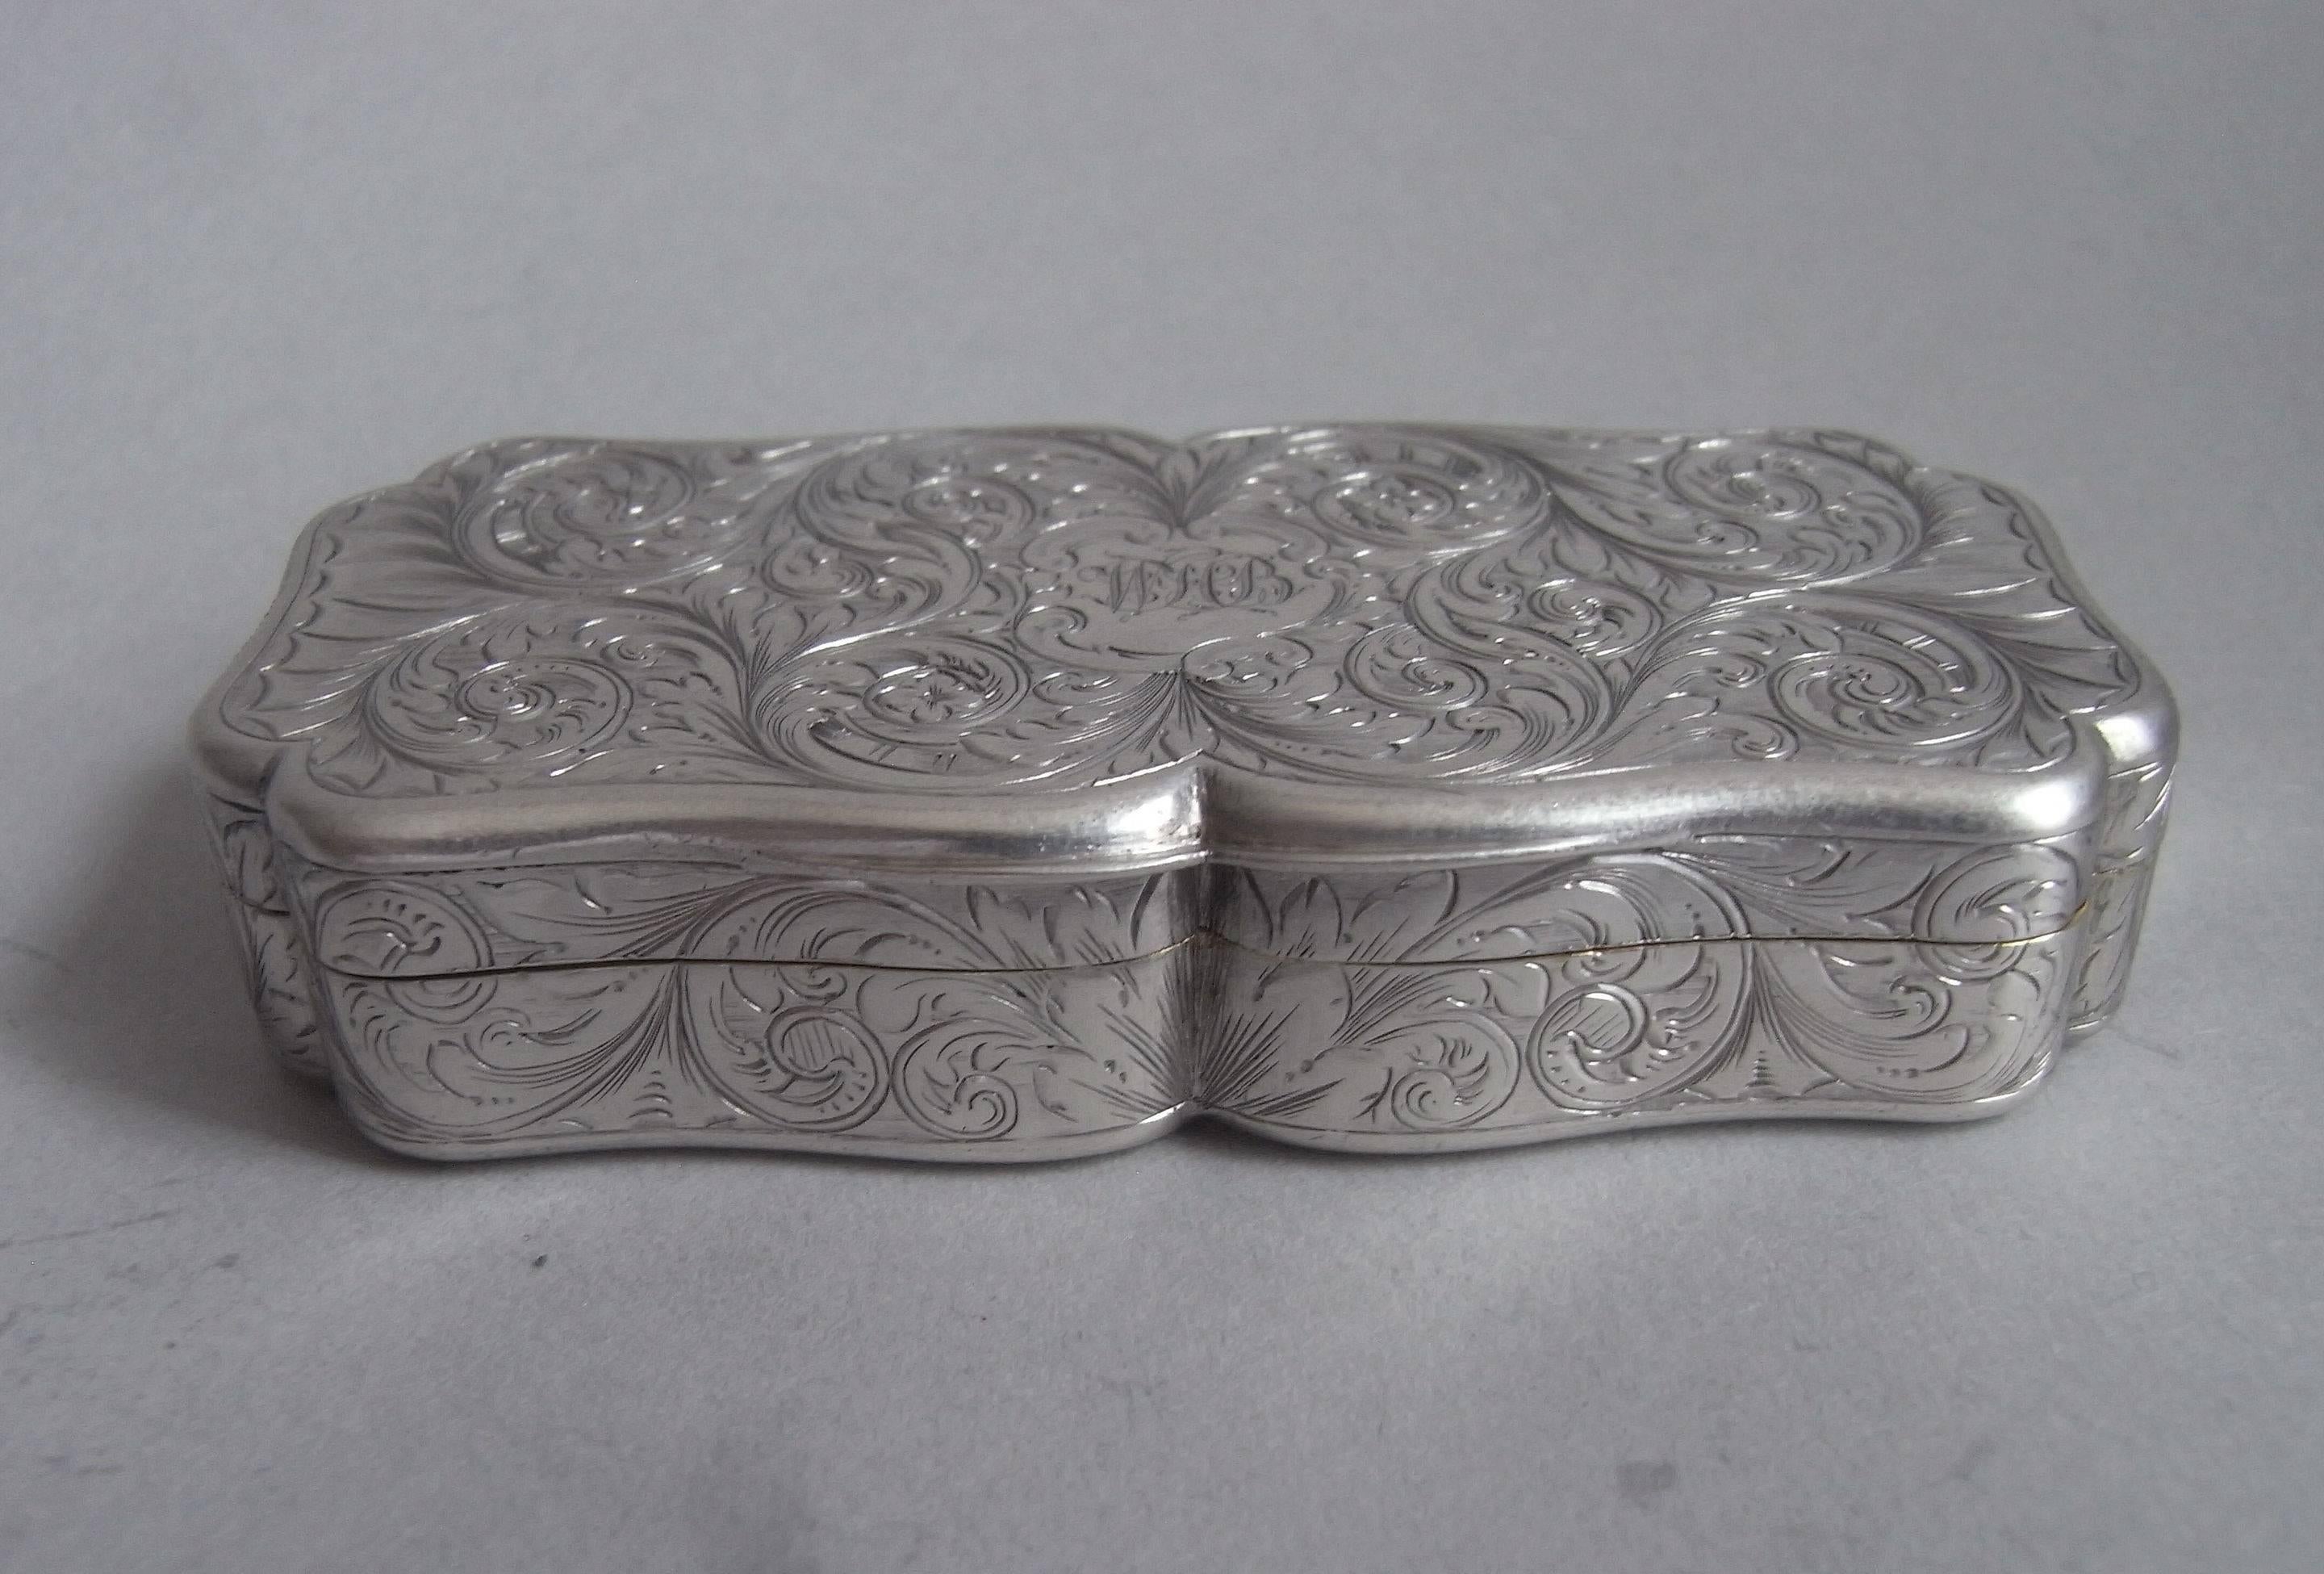 The snuff box is broad rectangular in form with serpentine shaped sides. The exterior is engraved all over with pluming scrolls, foliate designs and a central flower head on the base. The cover displays a Rococo cartouche containing contemporary